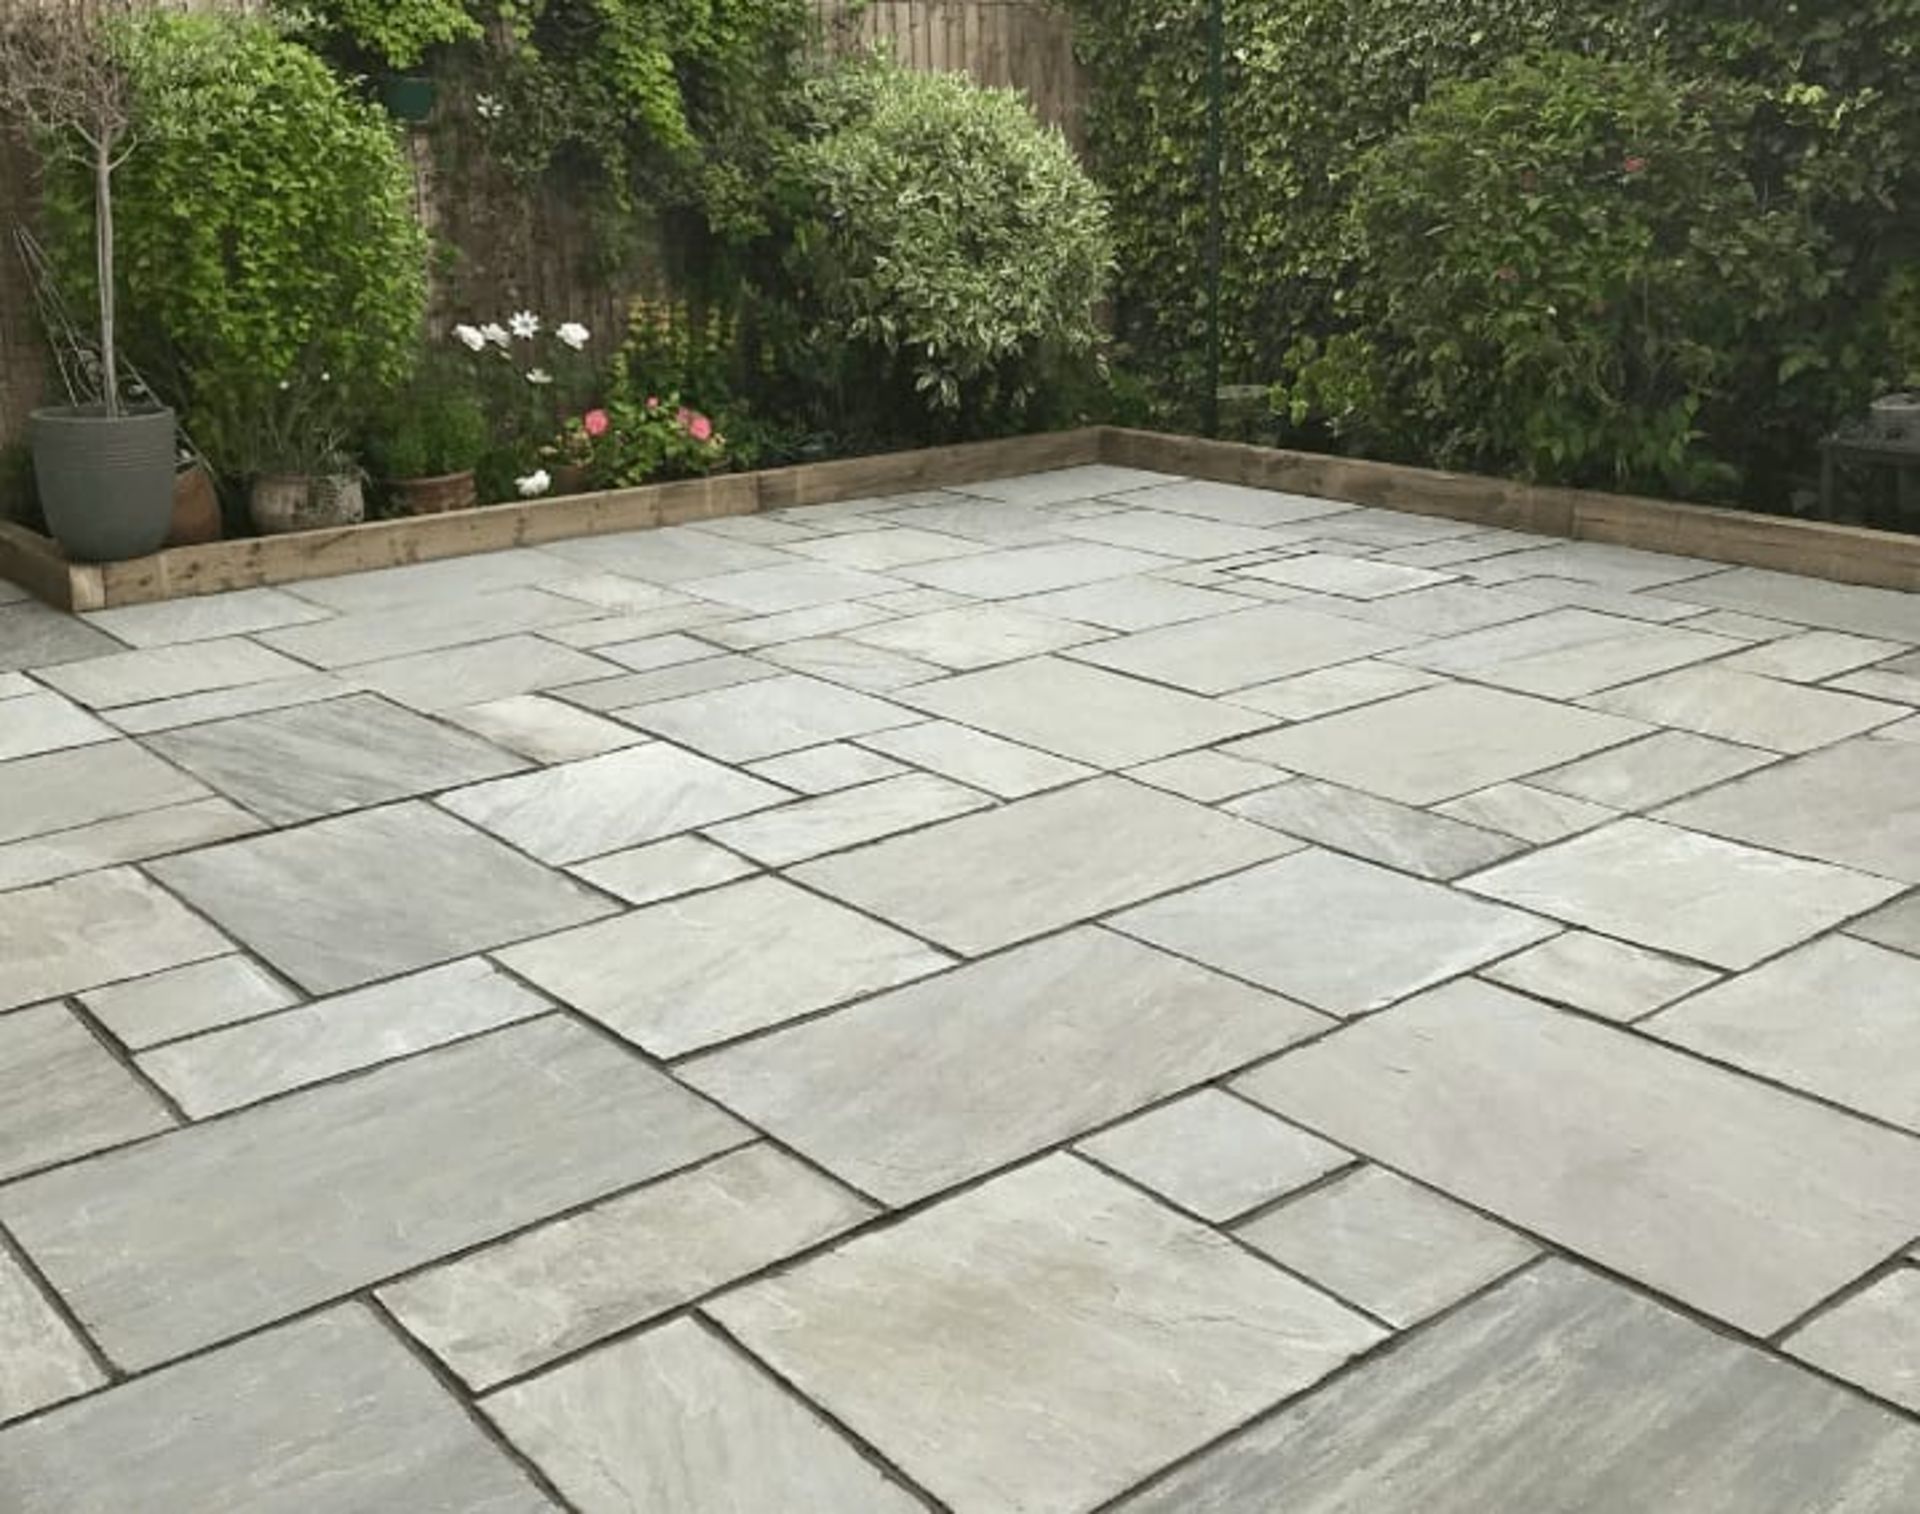 1 PALLET OF 18.9M2 KANDLA GREY INDIAN STONE PATIO PACK - 64 PIECES - 22MM CALIBRATED 